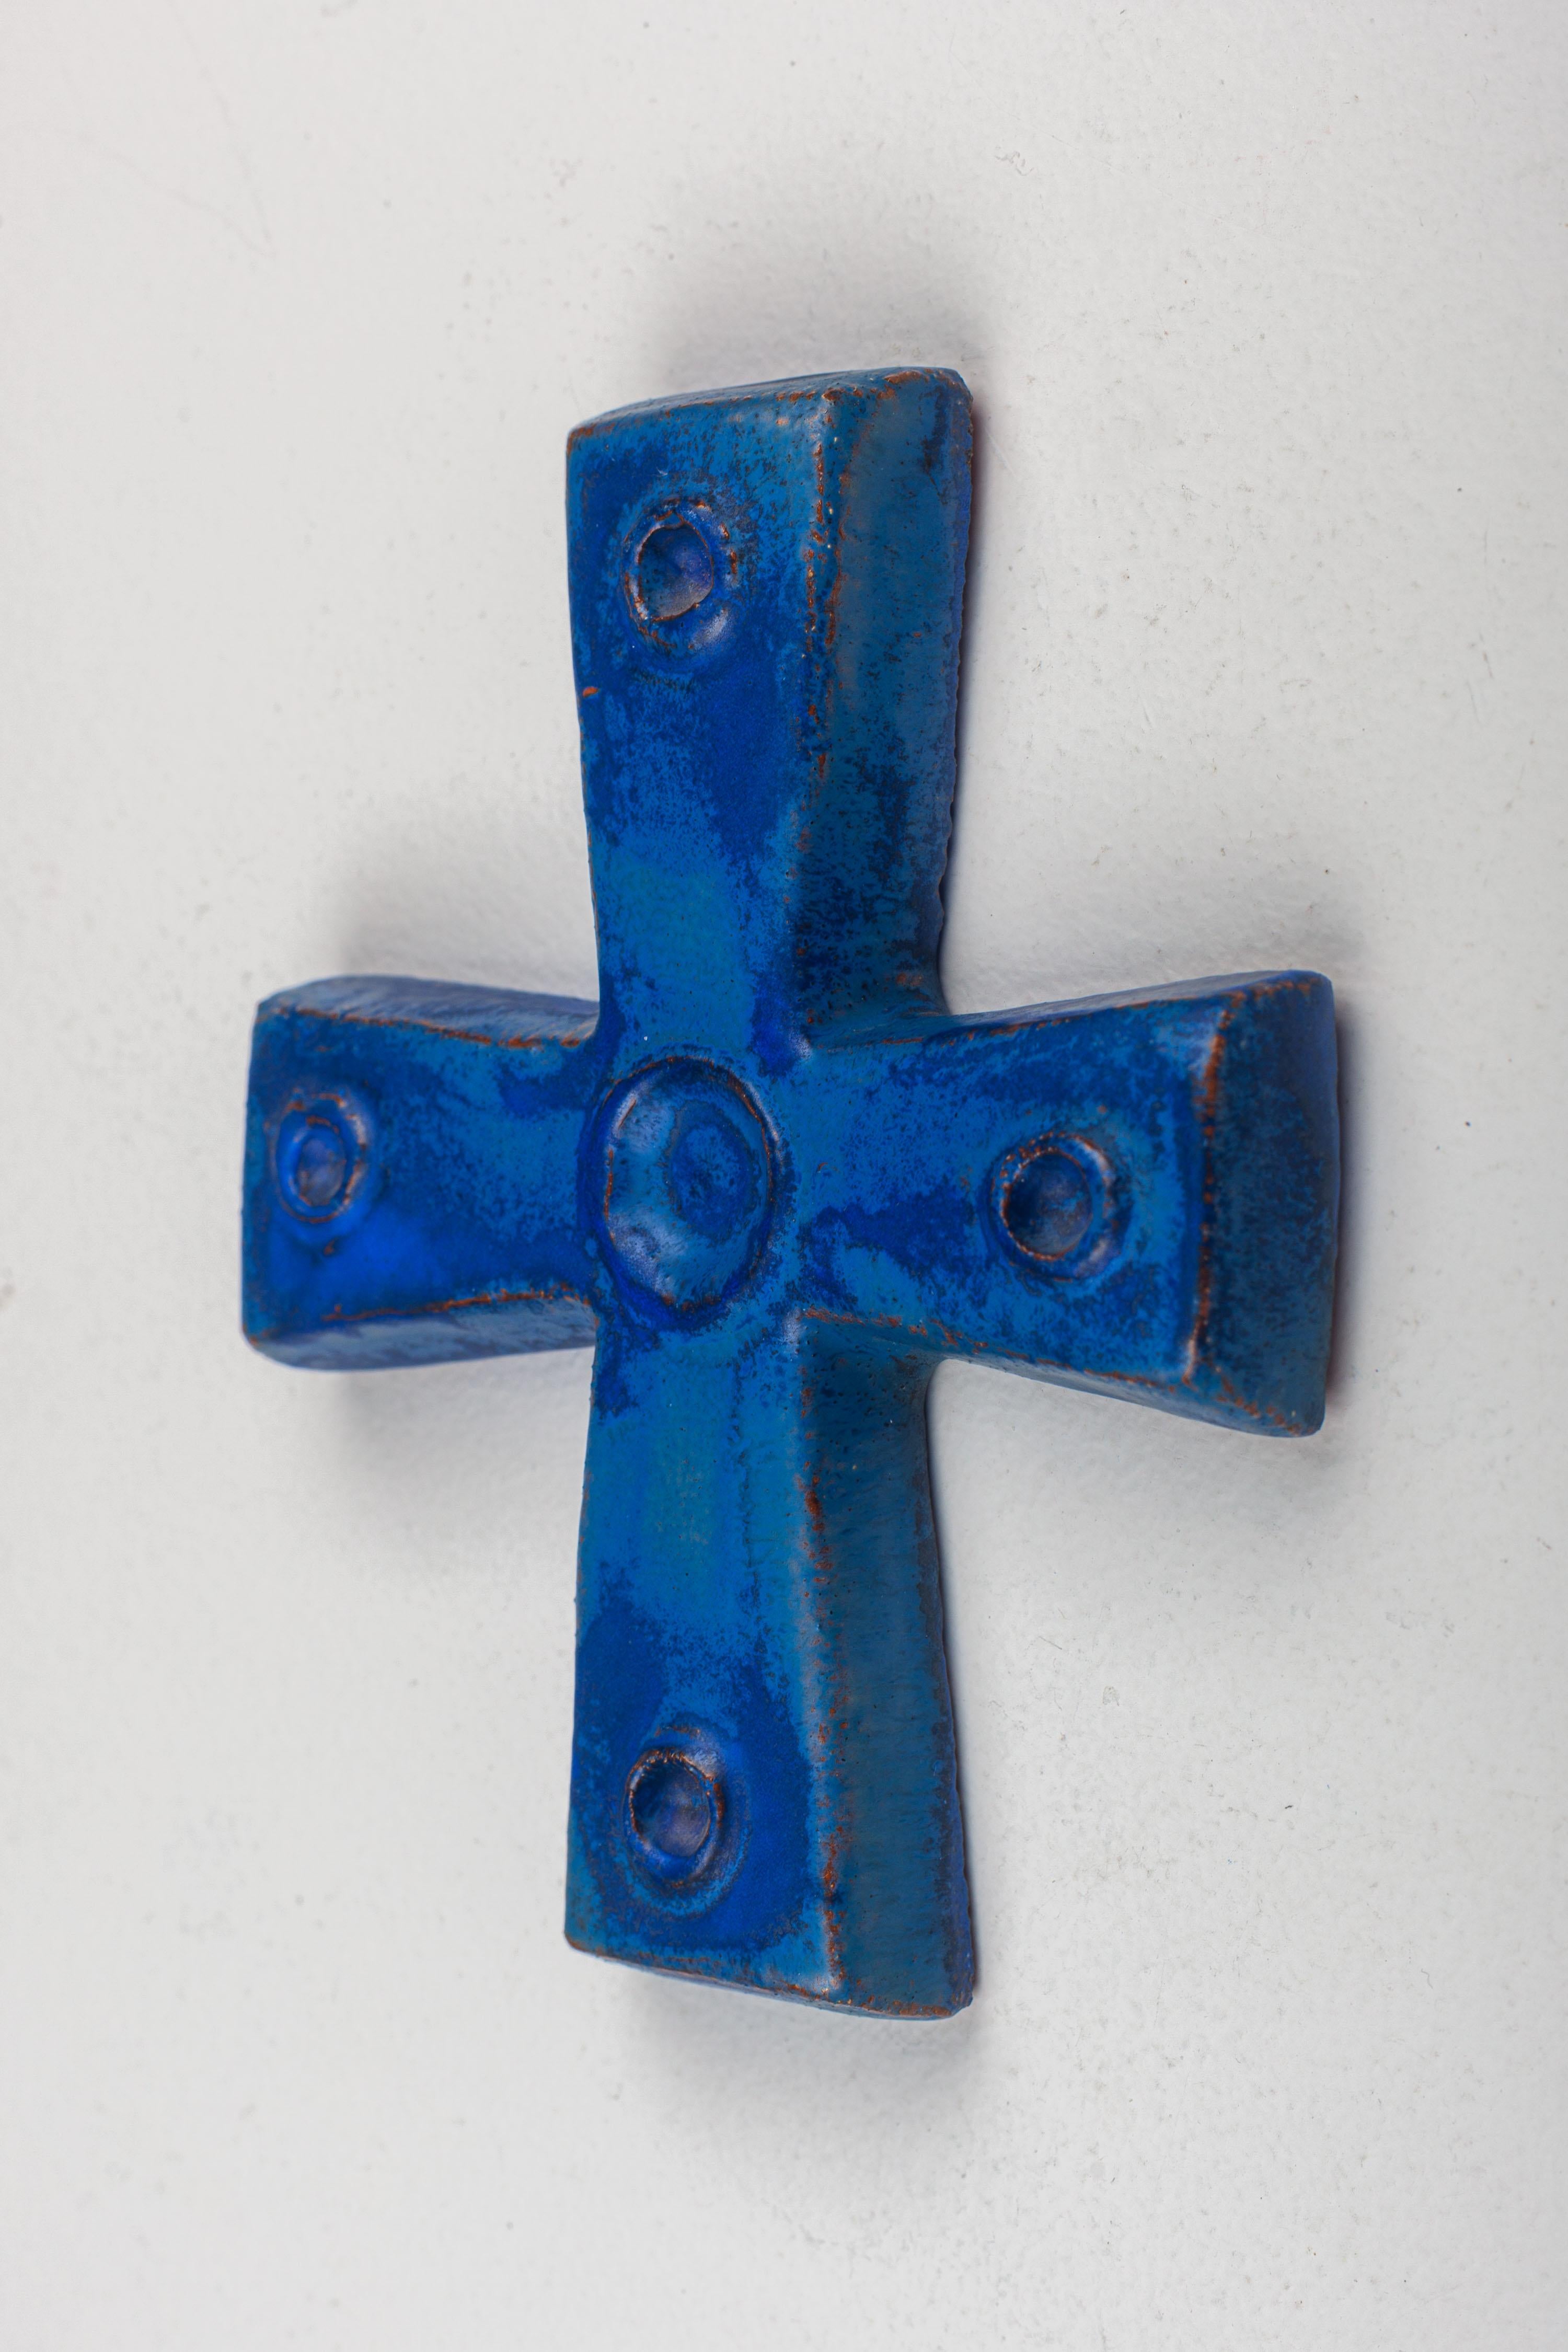 A midcentury ceramic cross made by Flemish artisan in deep and bright Klein blue. Each tip of the cross and its center are adorned with circular embellishments in hollow relief, adding layers of visual intrigue to this stunning collectible.

Klein